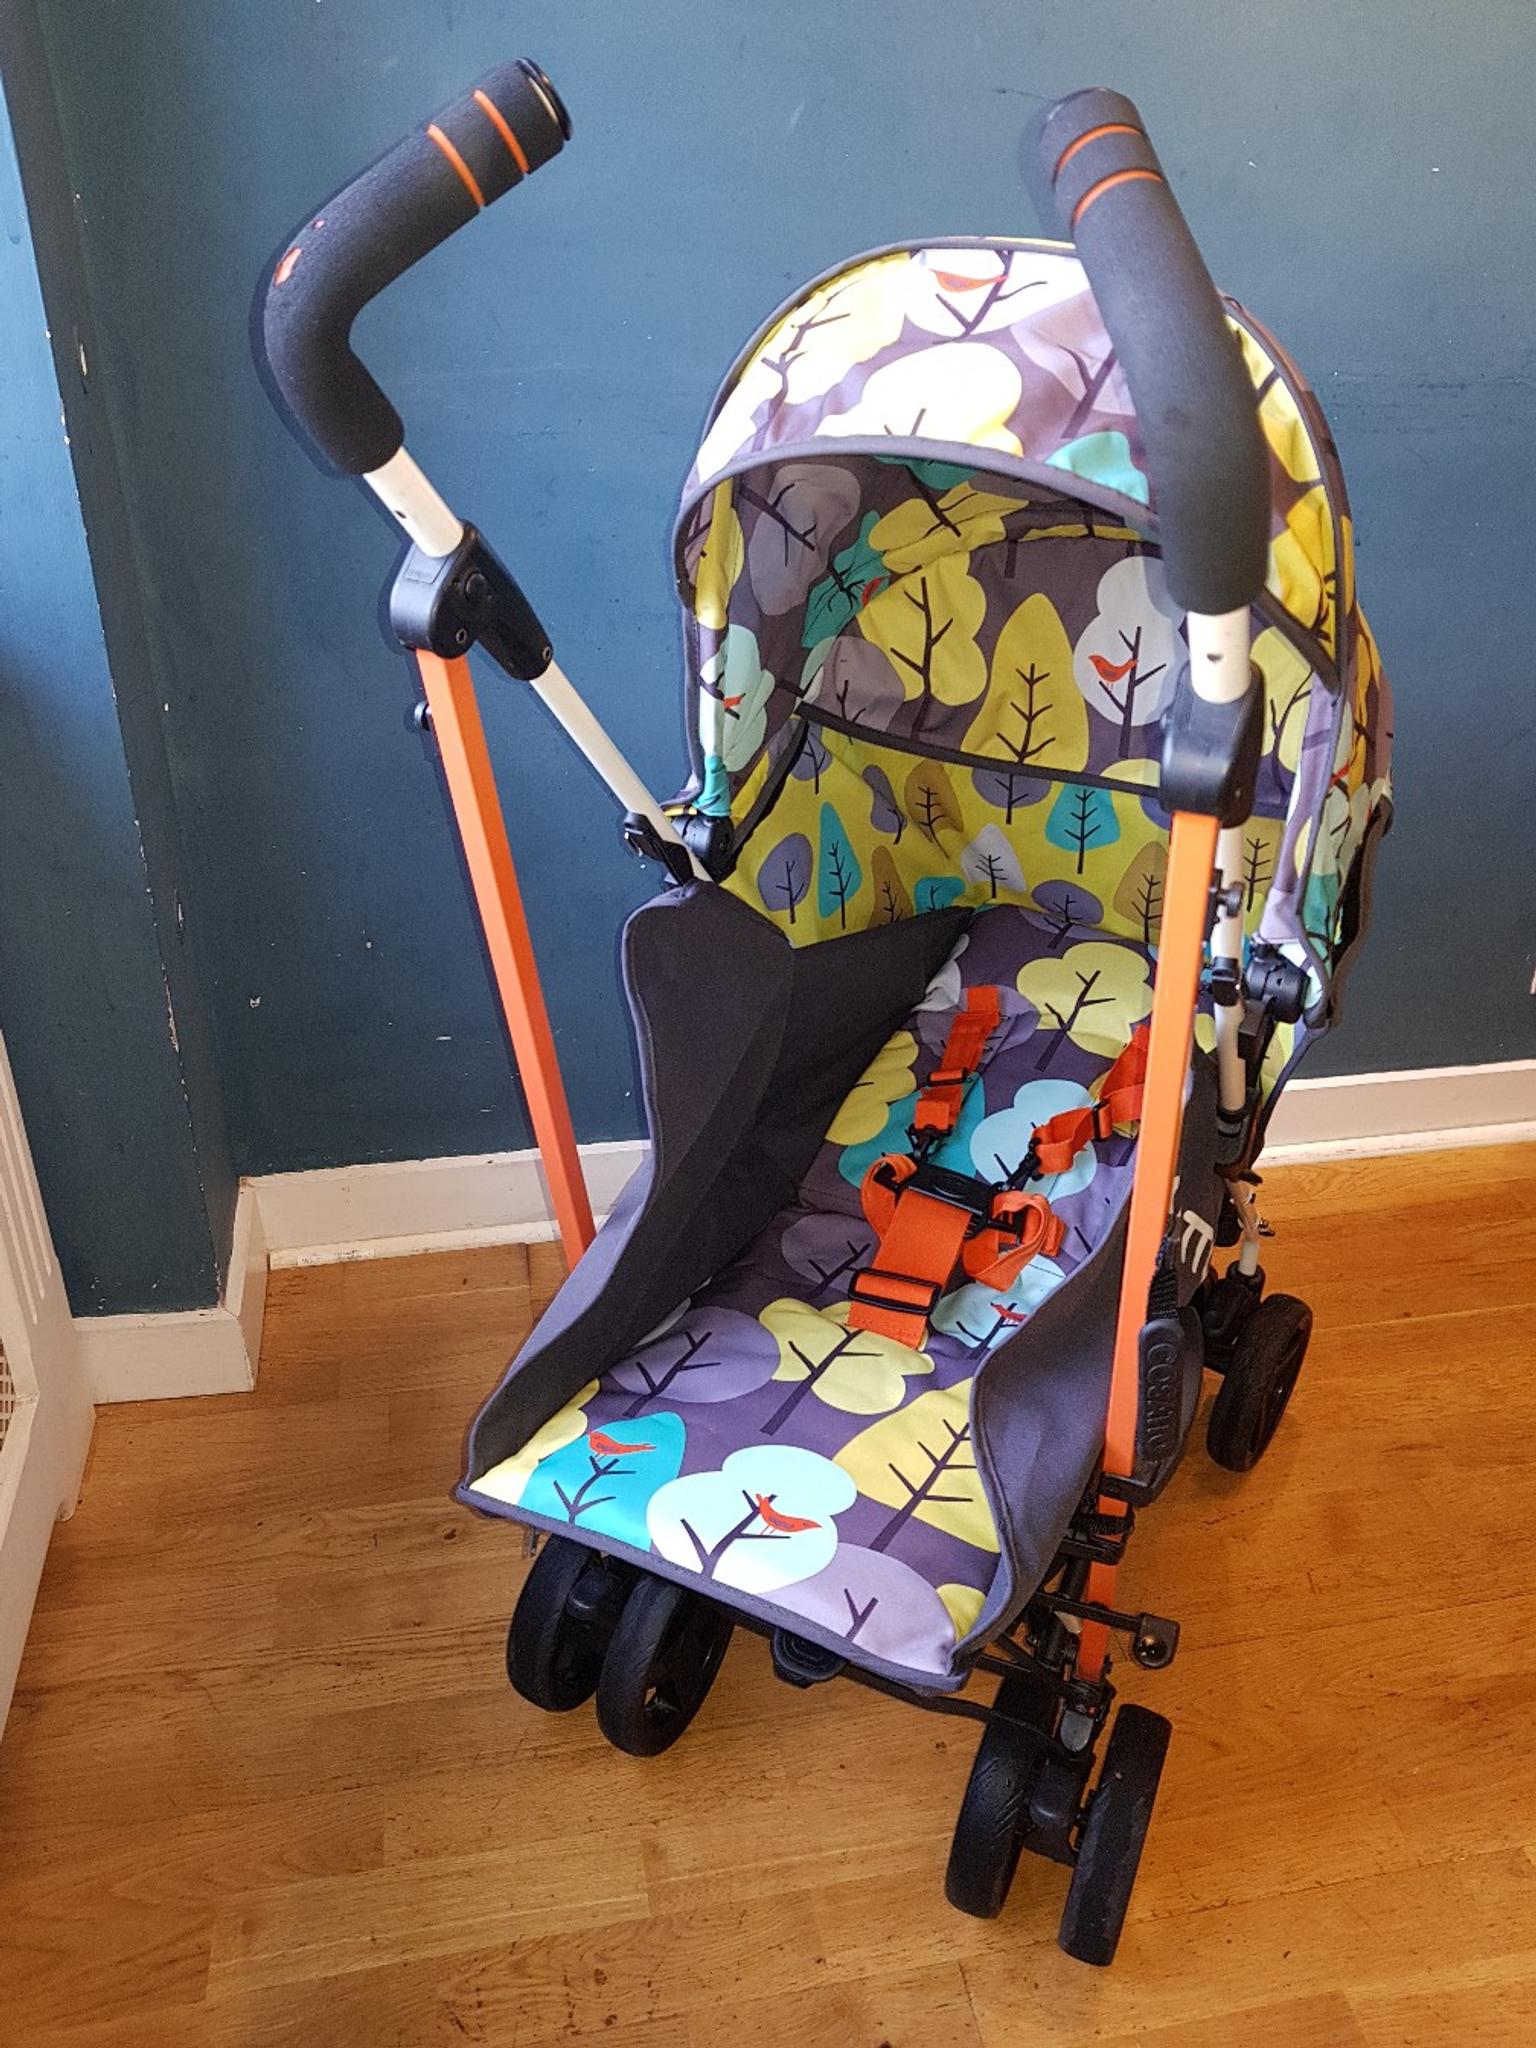 cosatto to and fro stroller